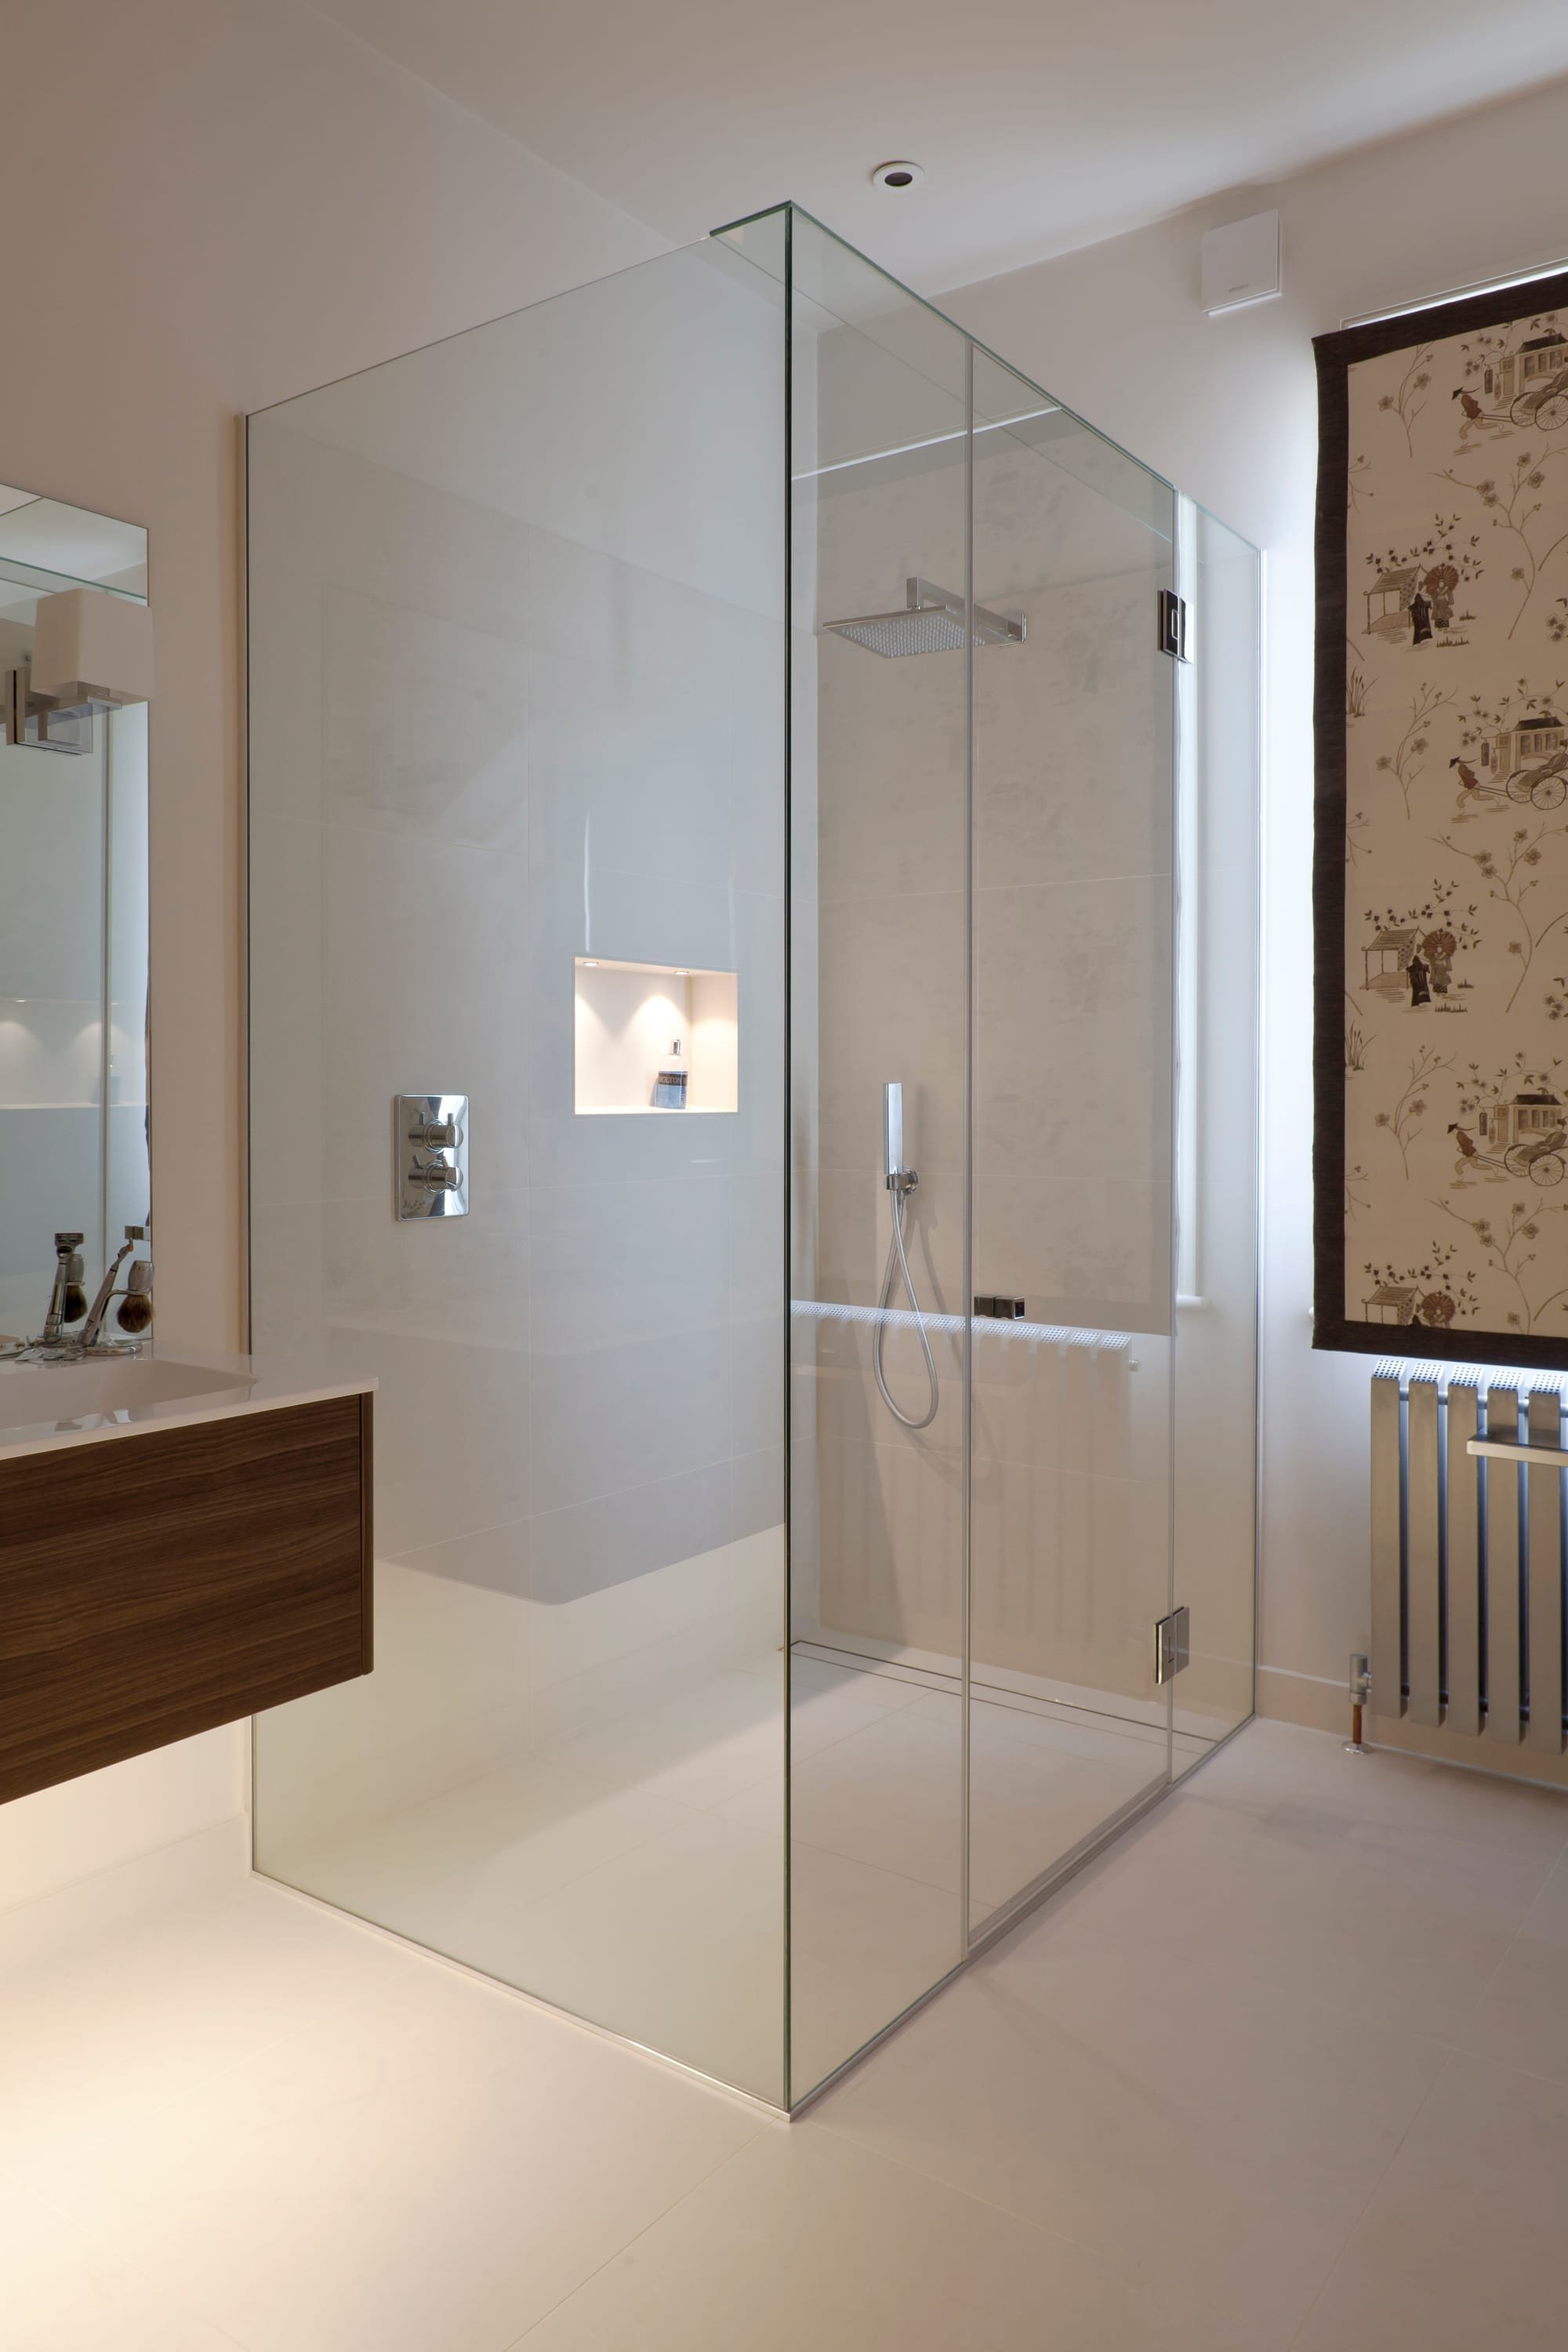 Stunning large shower in this en-suite bathroom in Clapham South Wandsworth SW12